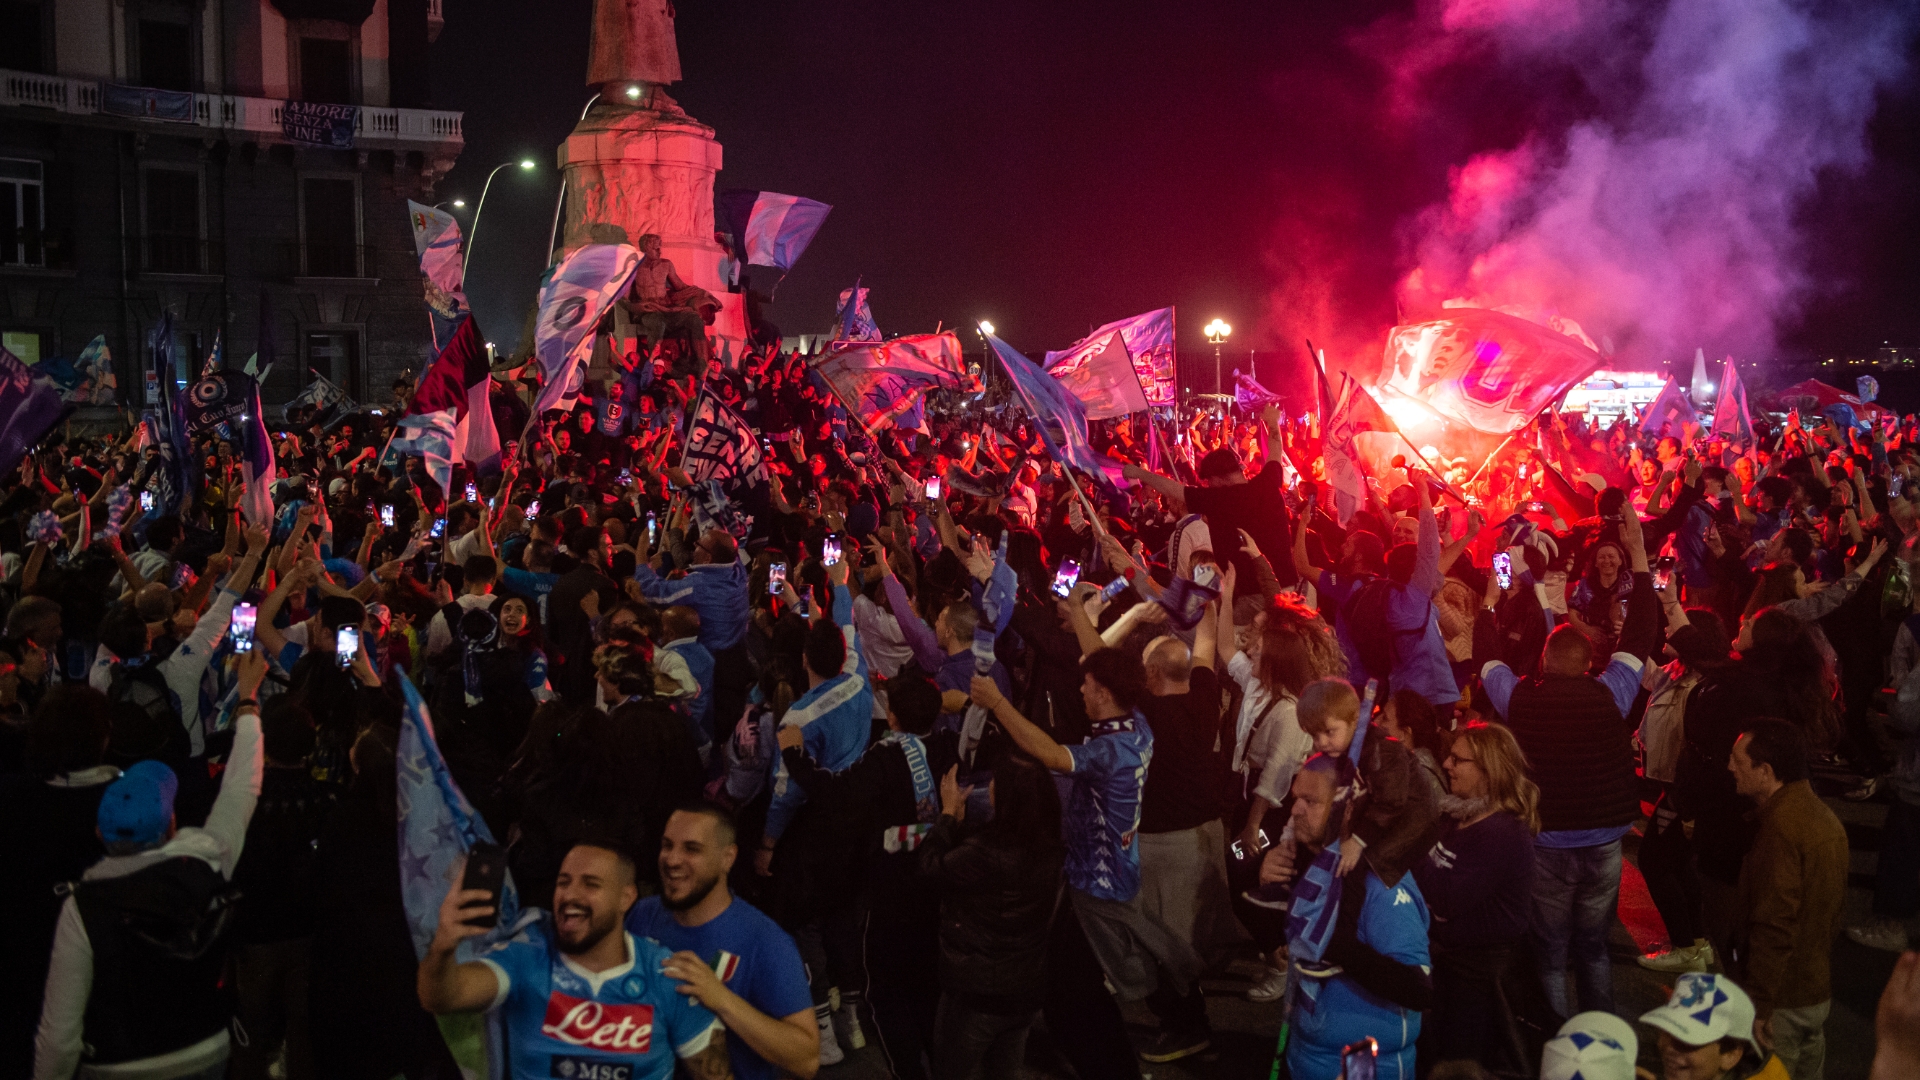 Napoli fans take to streets to celebrate first Serie A title in 33 years - Stream the Video